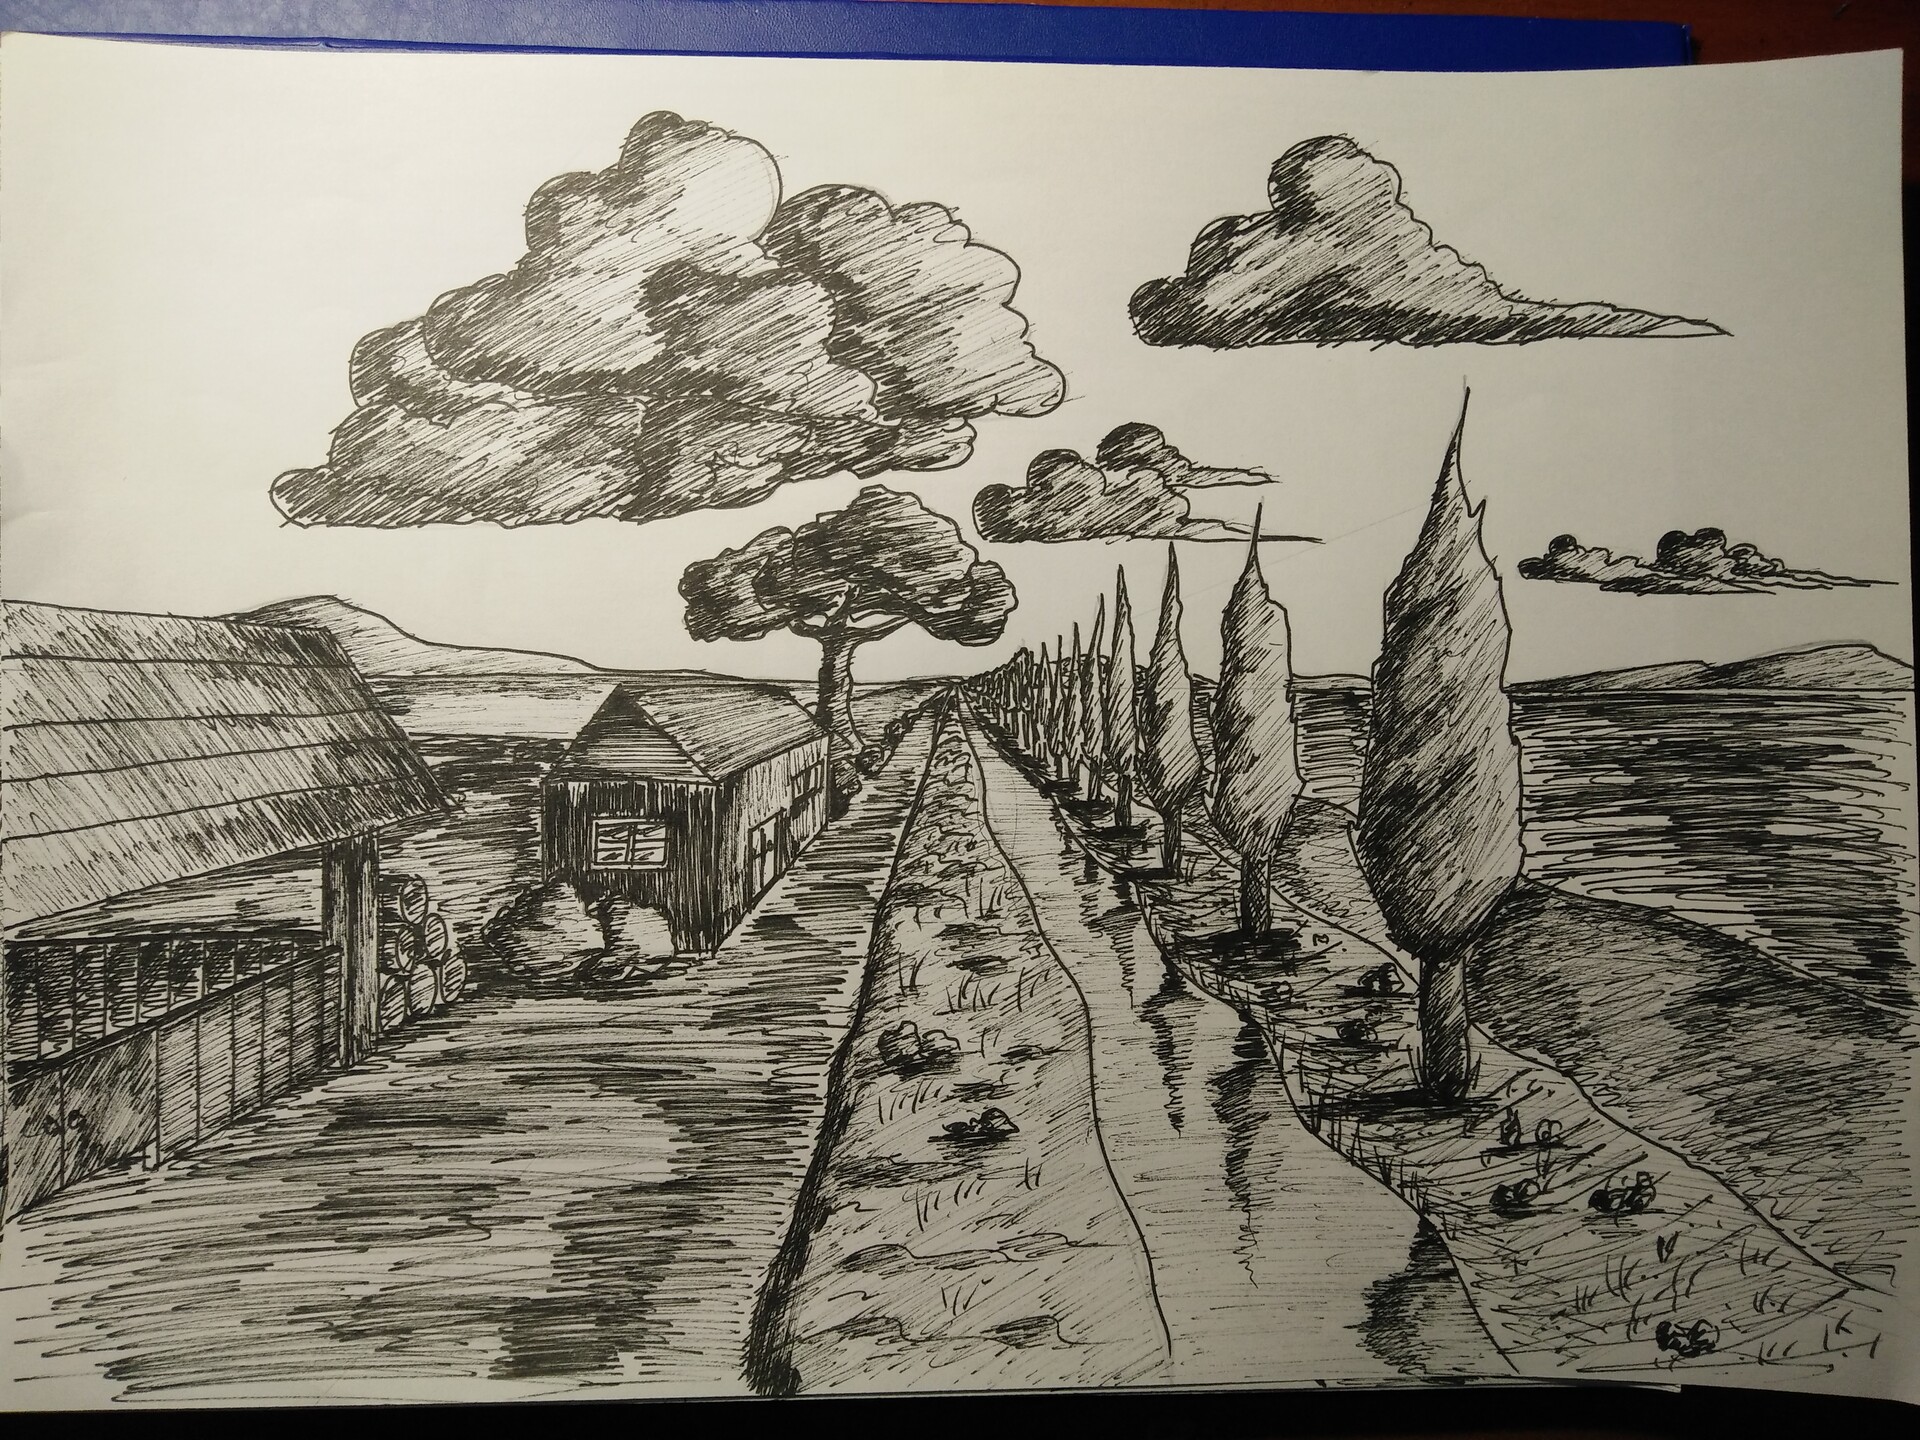 Draw a Landscape by Shade-the-AshClad on DeviantArt